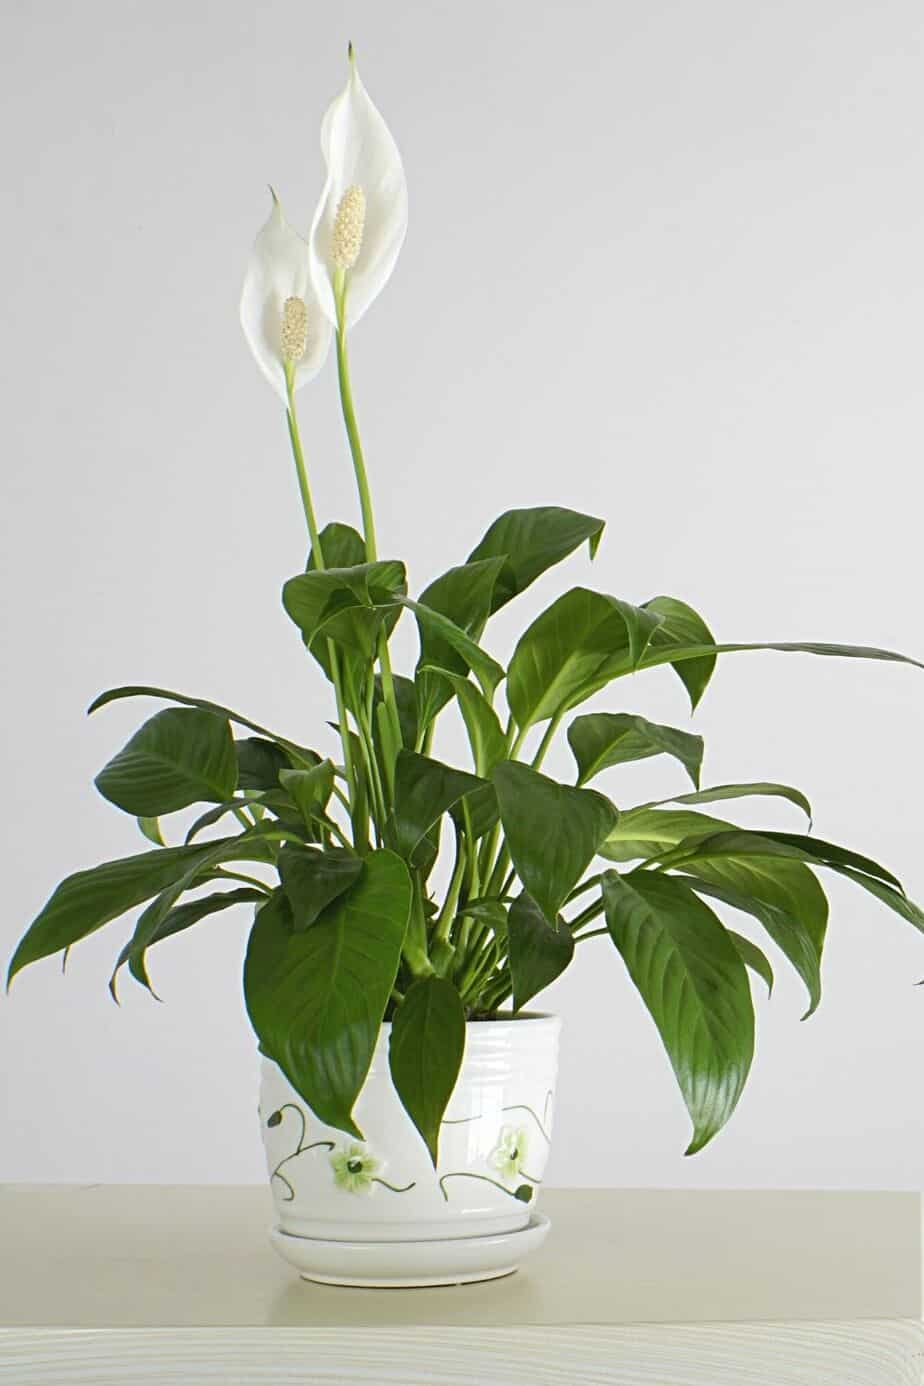 Peace Lily is a delicate plant that requires using lukewarm water to submerge its roots into